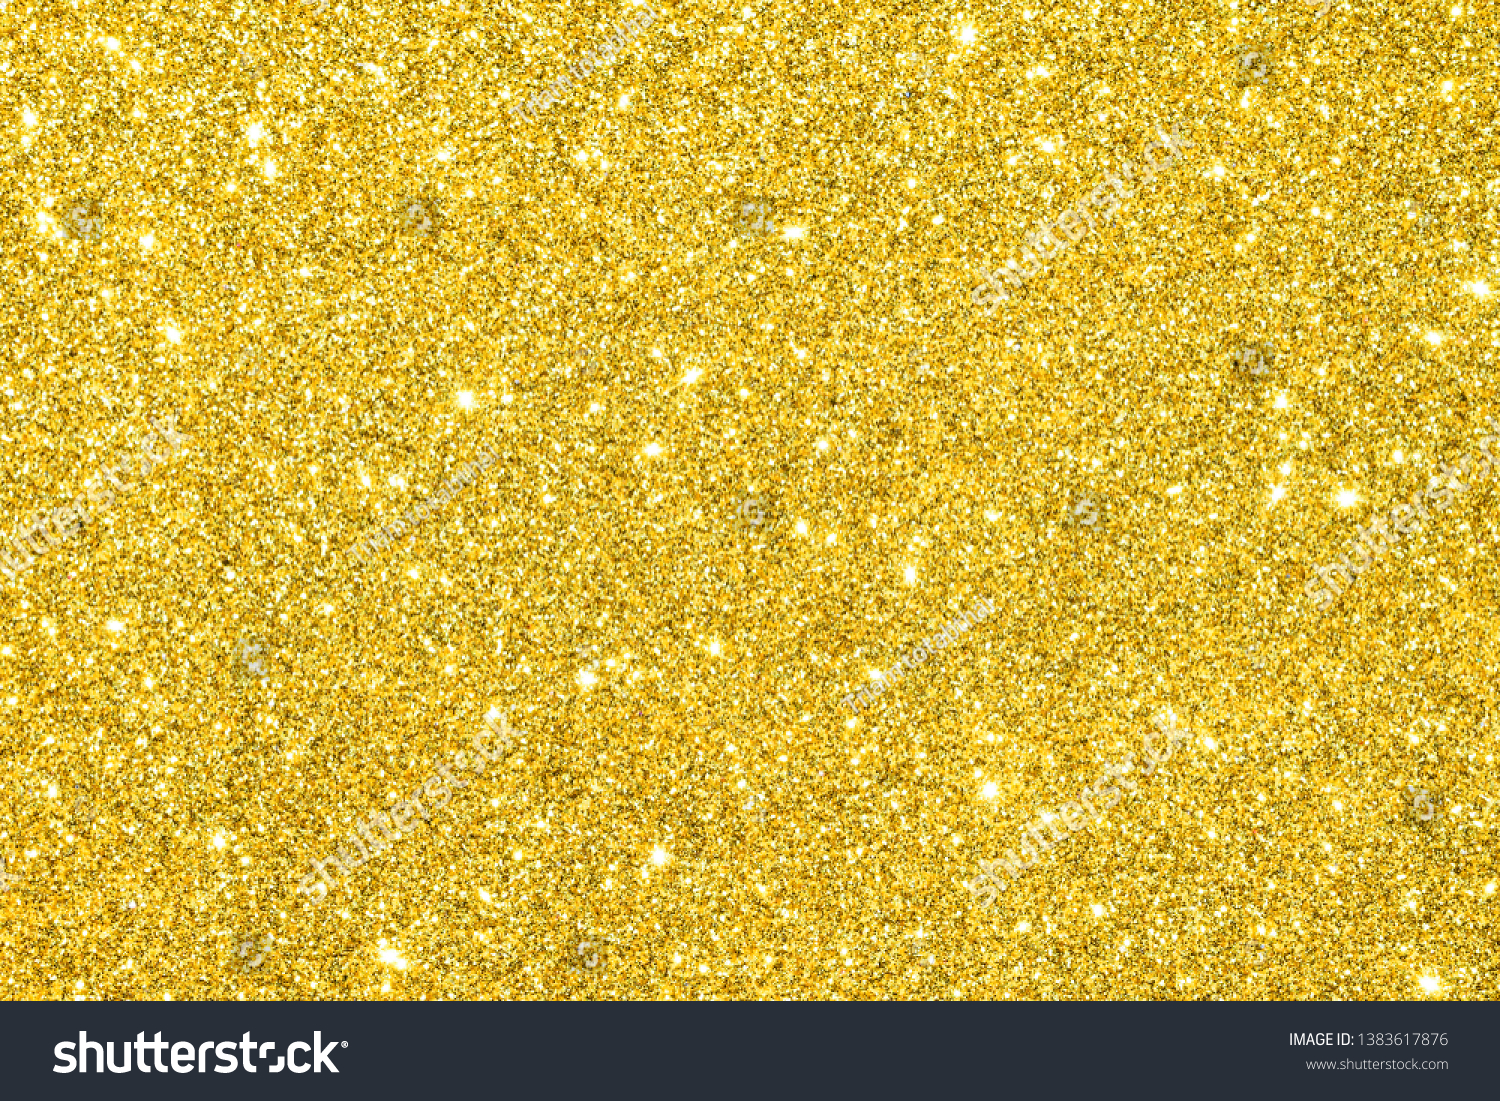 sparkle of gold glitter texture background #1383617876